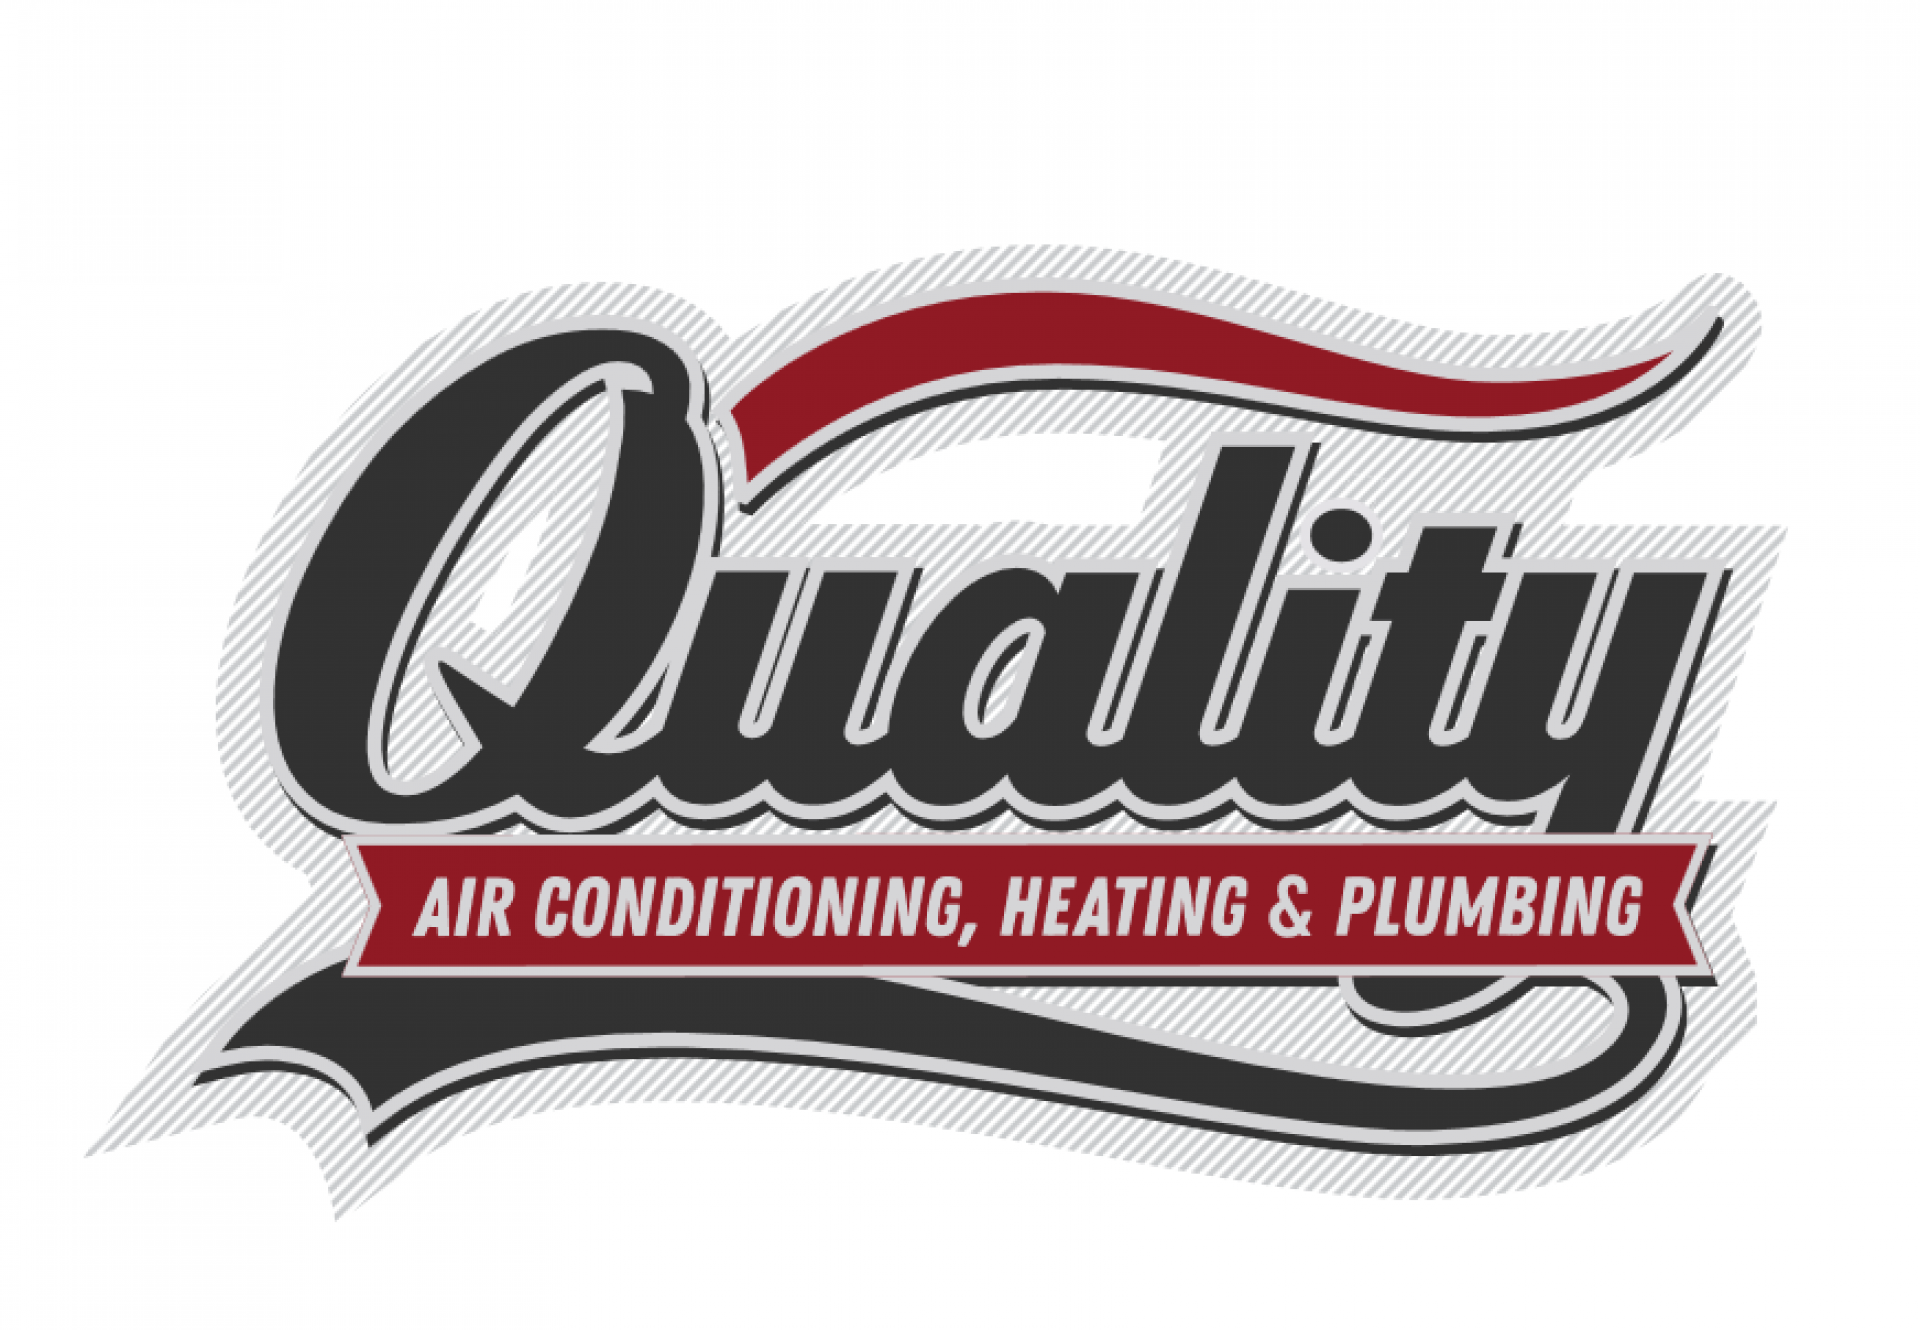 Quality Air Conditioning Heating & Plumbing logo